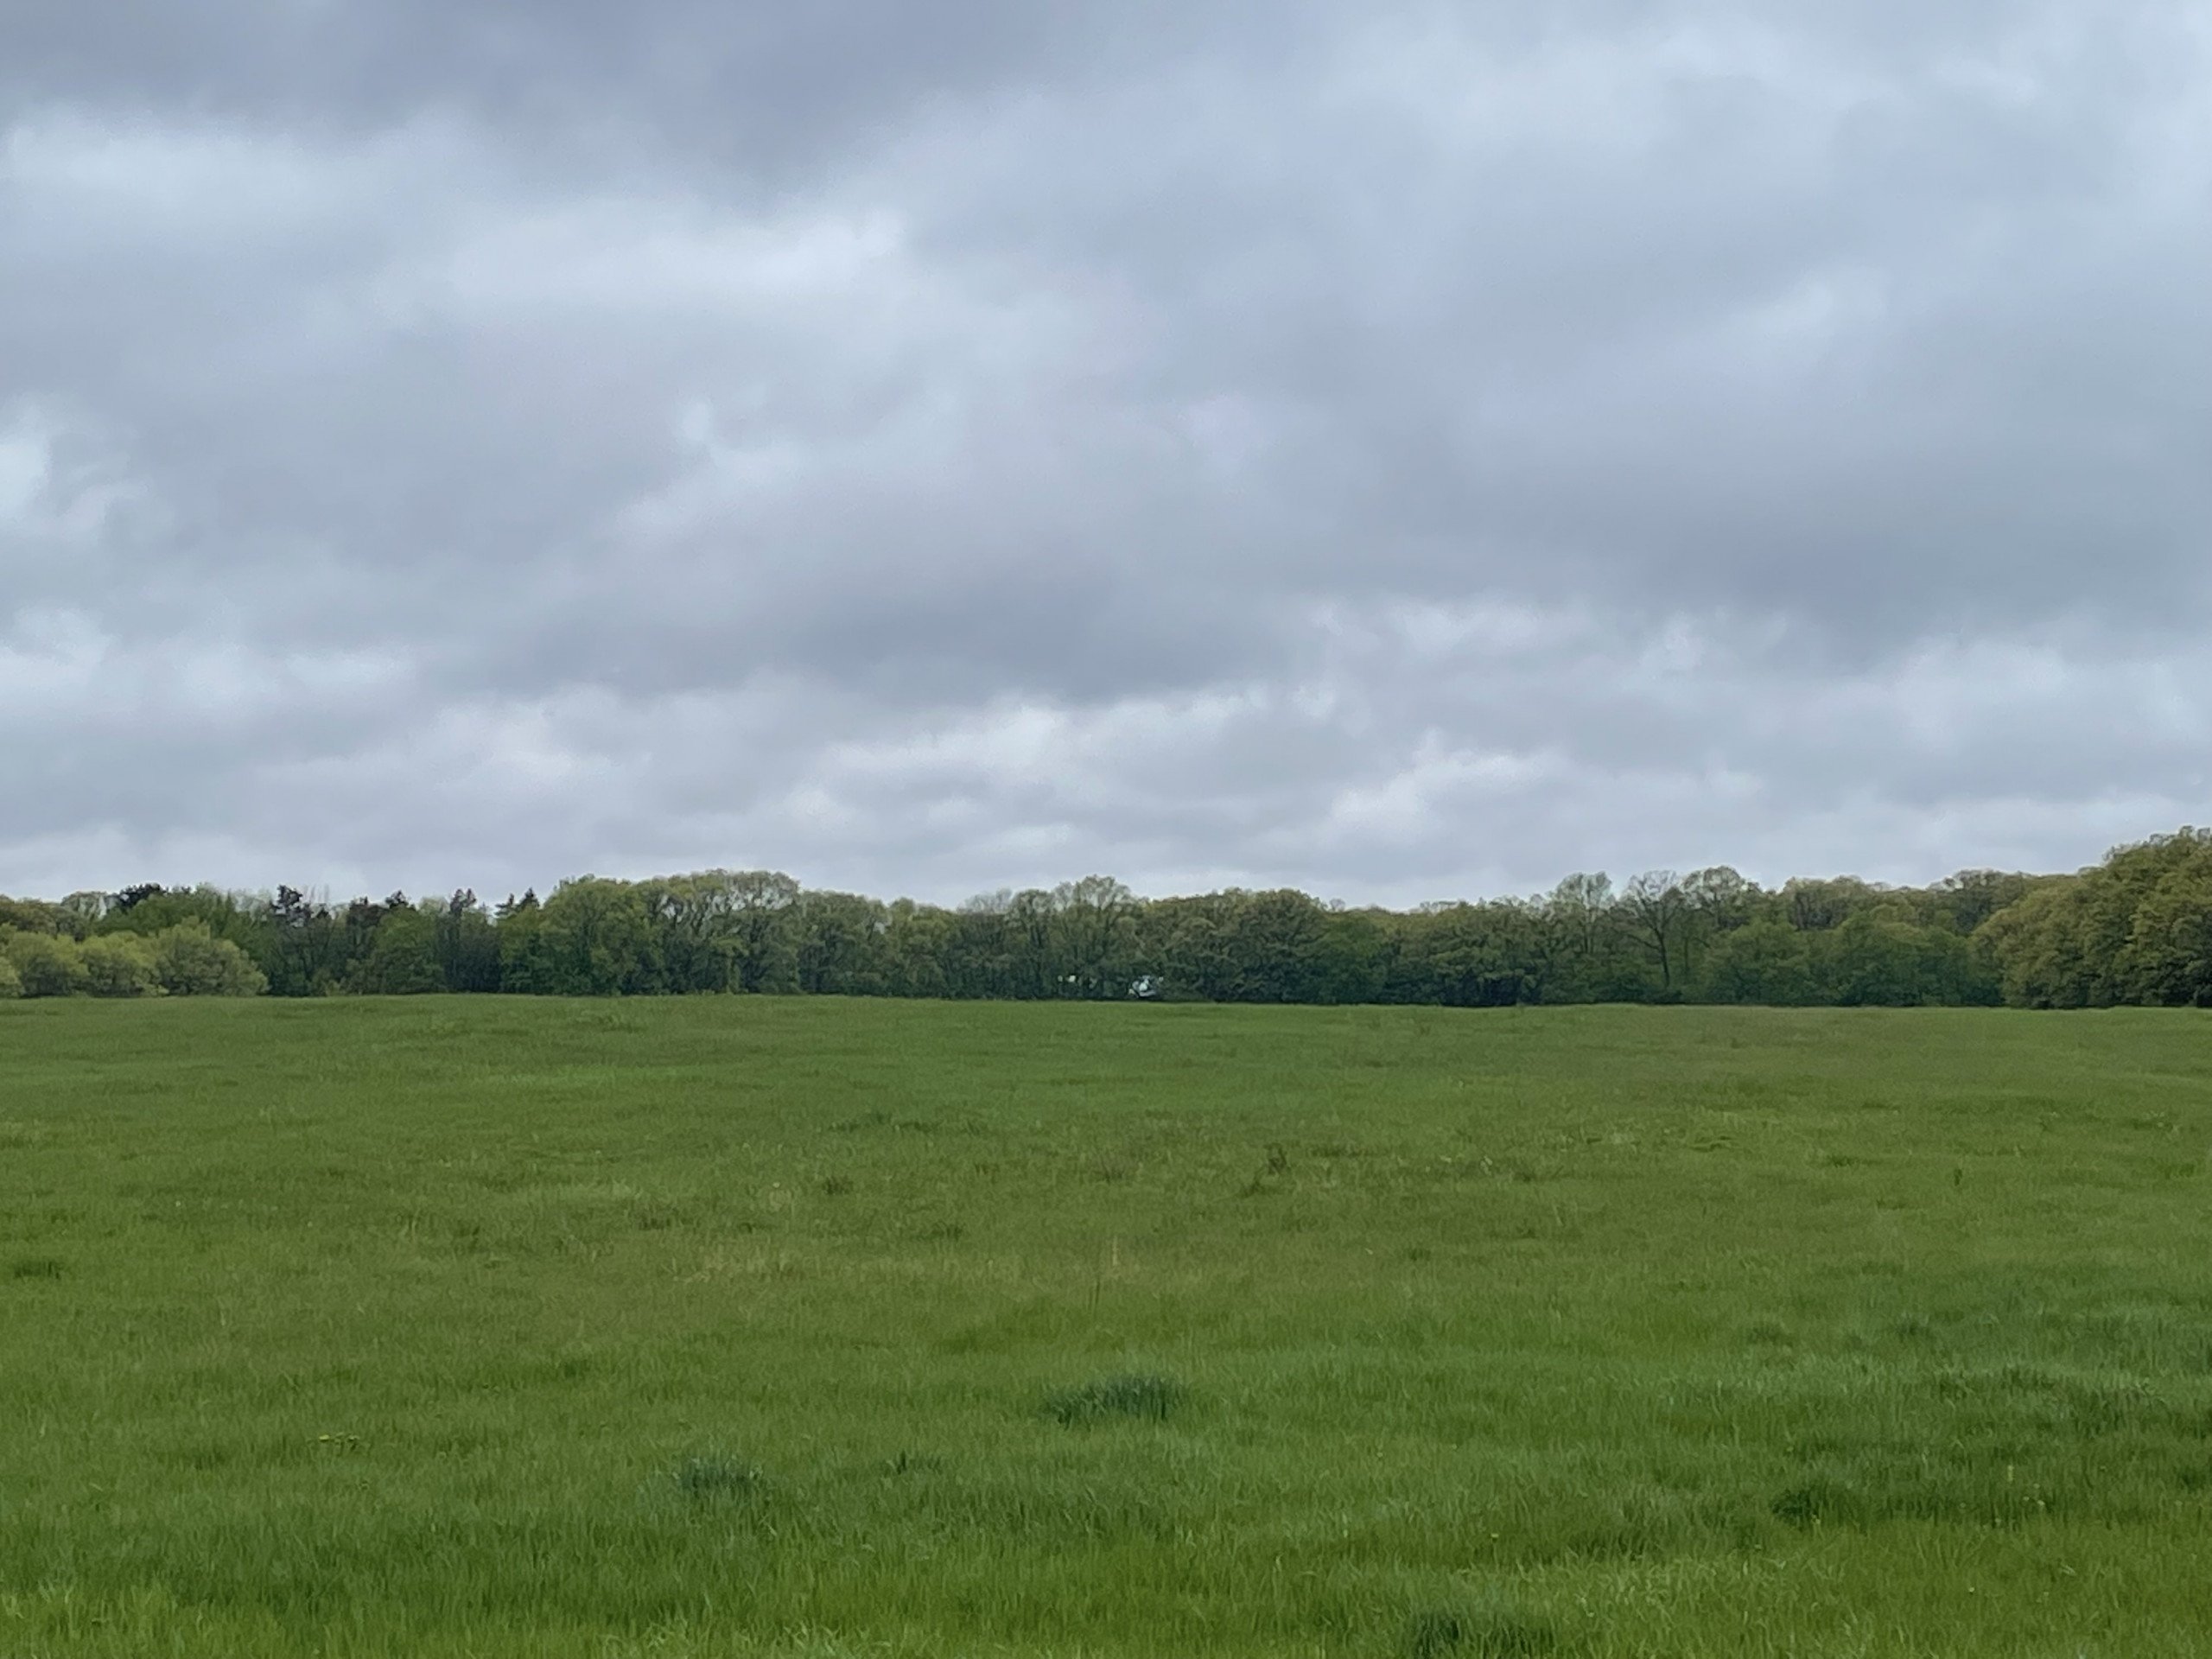 residential-auctions-land-sherburne-county-minnesota-85-acres-listing-number-16161-tract 1 main land to use-5.jpg